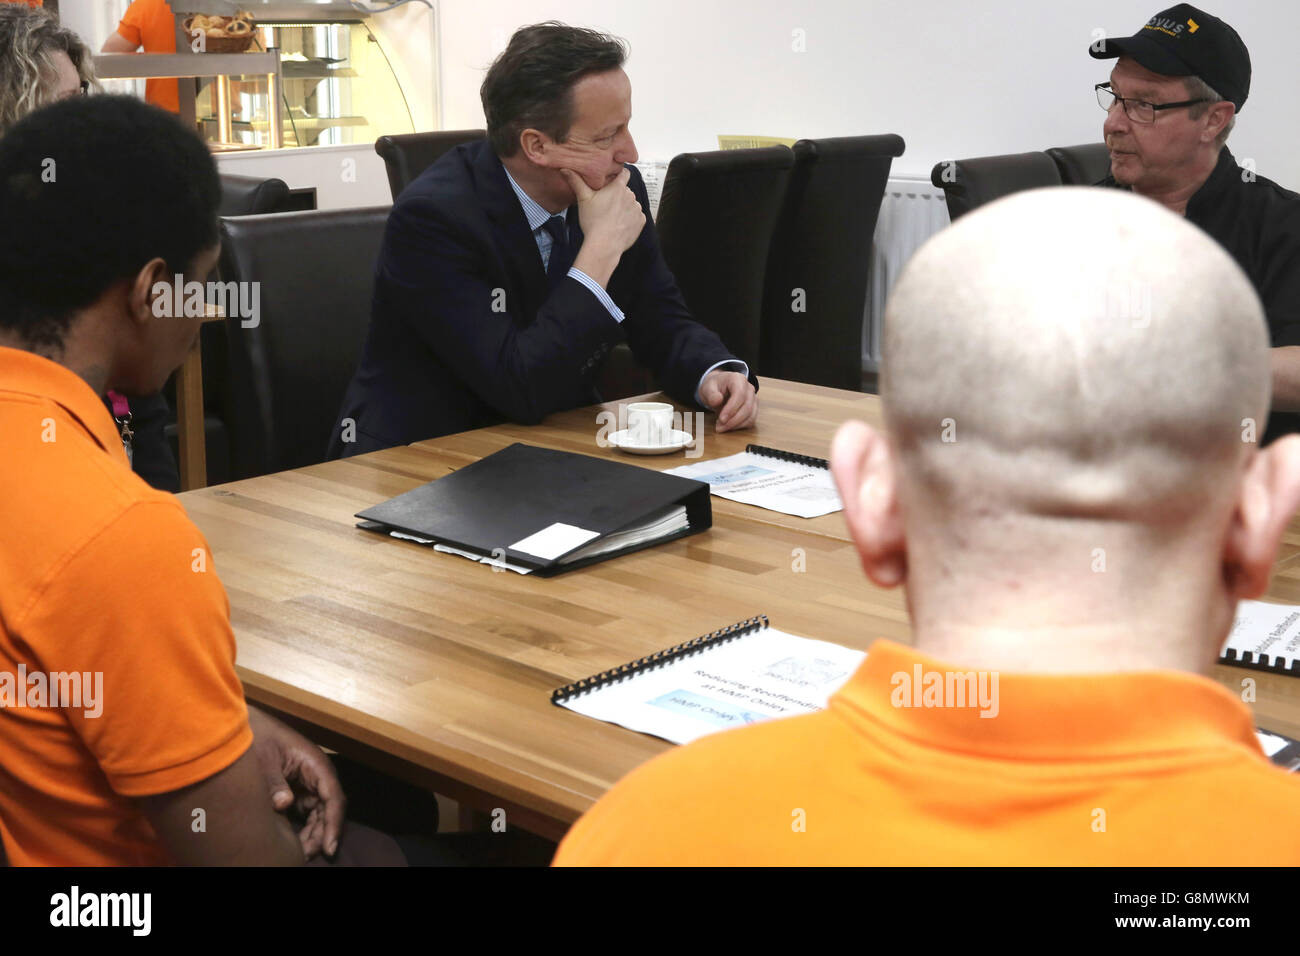 Prime Minister David Cameron has a coffee as he talks to inmates and staff inside The Lock Inn Cafe as he tours HMP Onley in Rugby ahead of a major speech on prison reform. Stock Photo